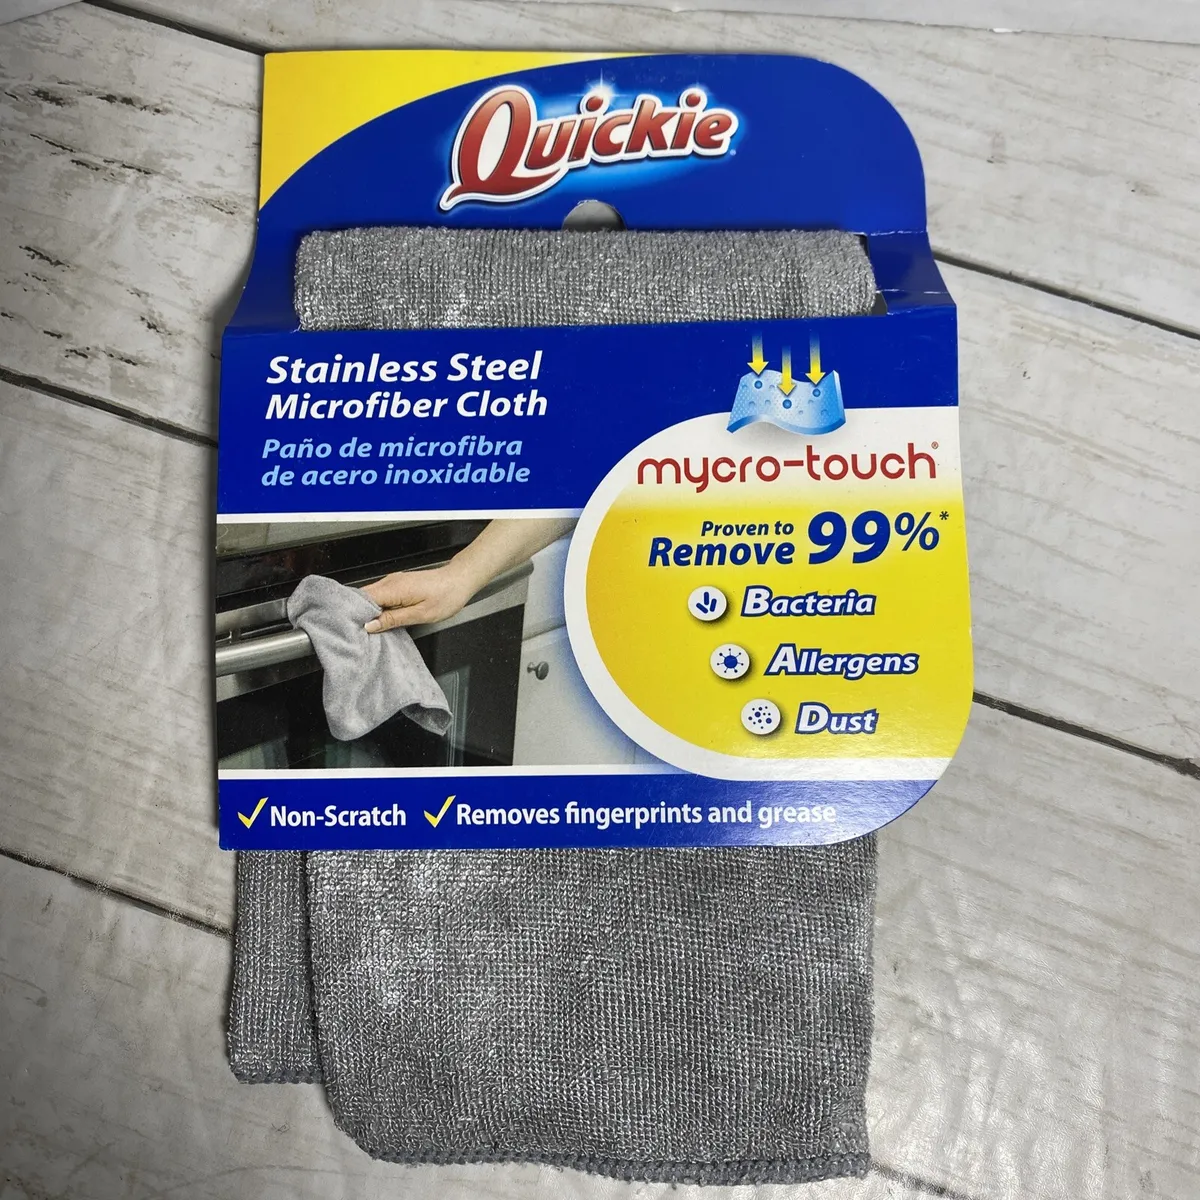 Microfiber Stainless Steel Cloth, 13x15 In Mycor-touch Non Scratch Quickie